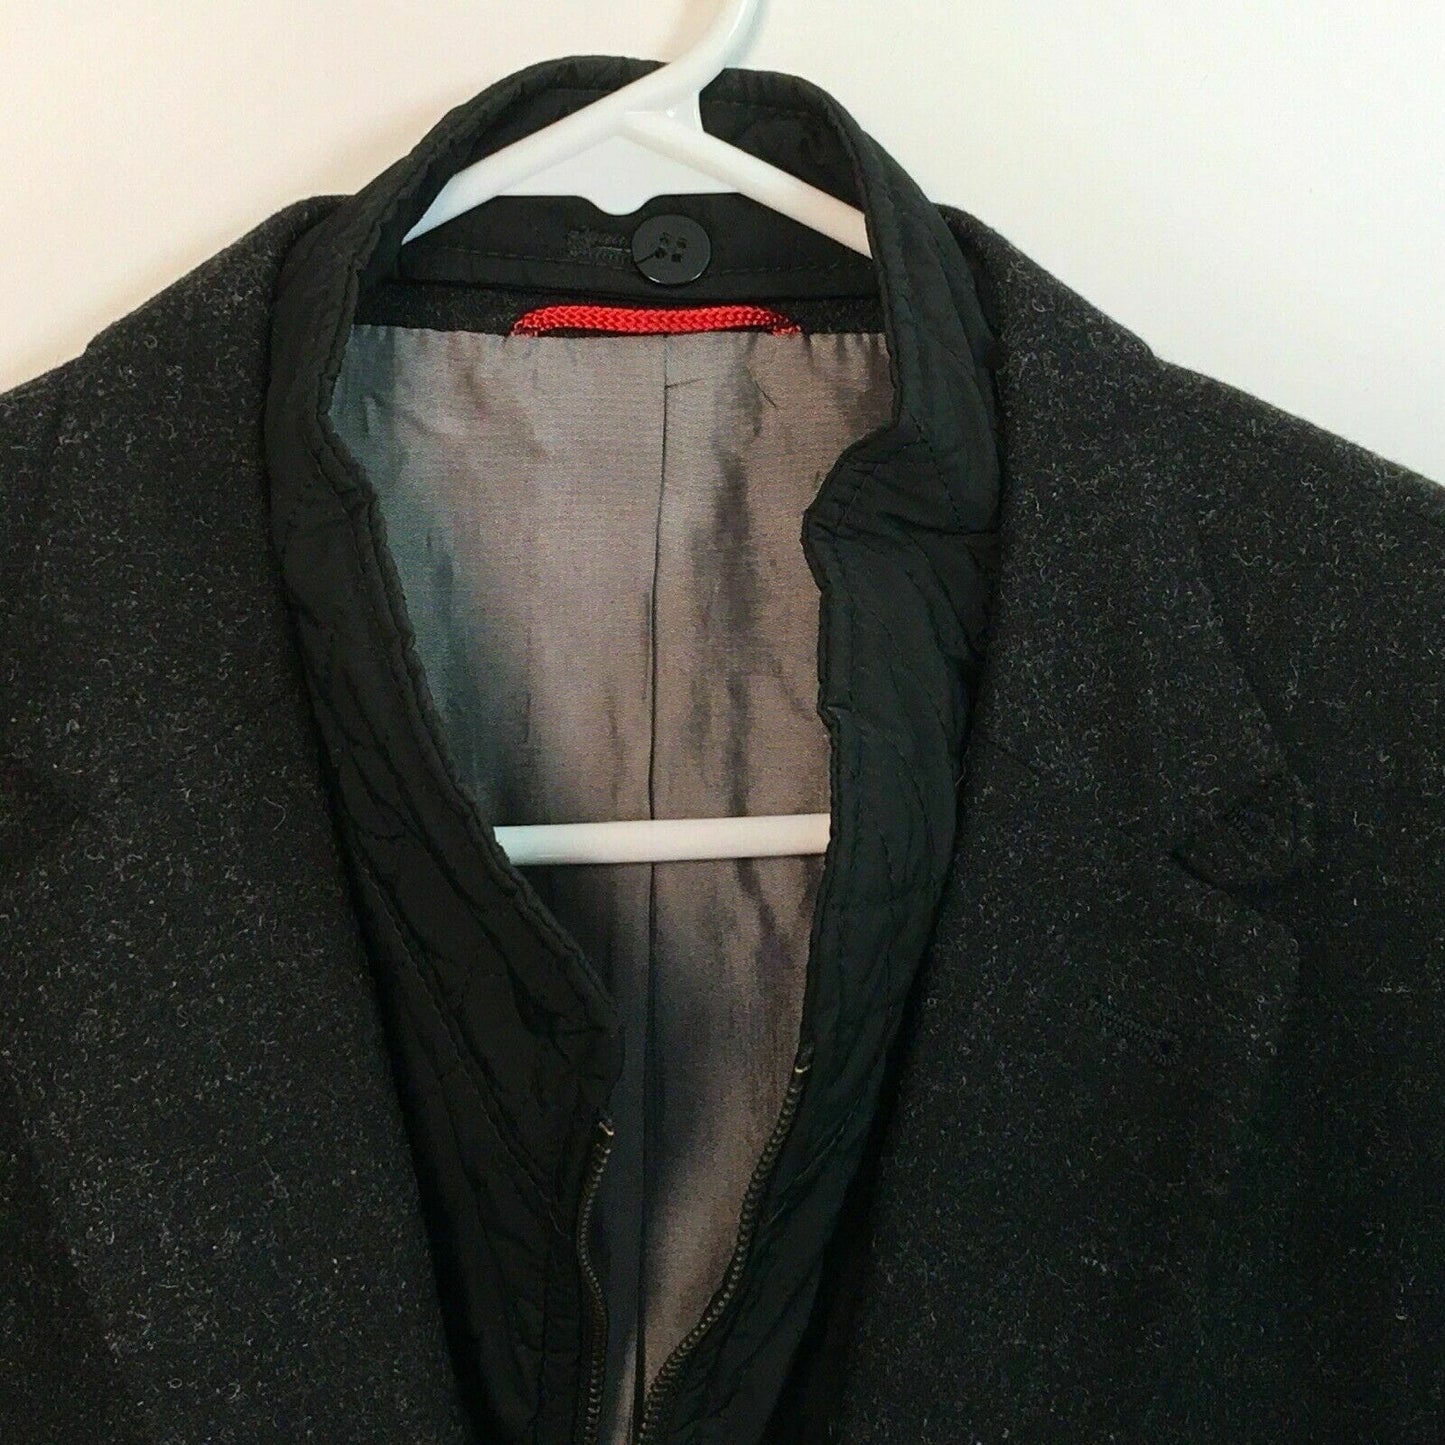 Digel Mens Wool Sport Coat Size XL Charcoal Gray with Zipout Liner